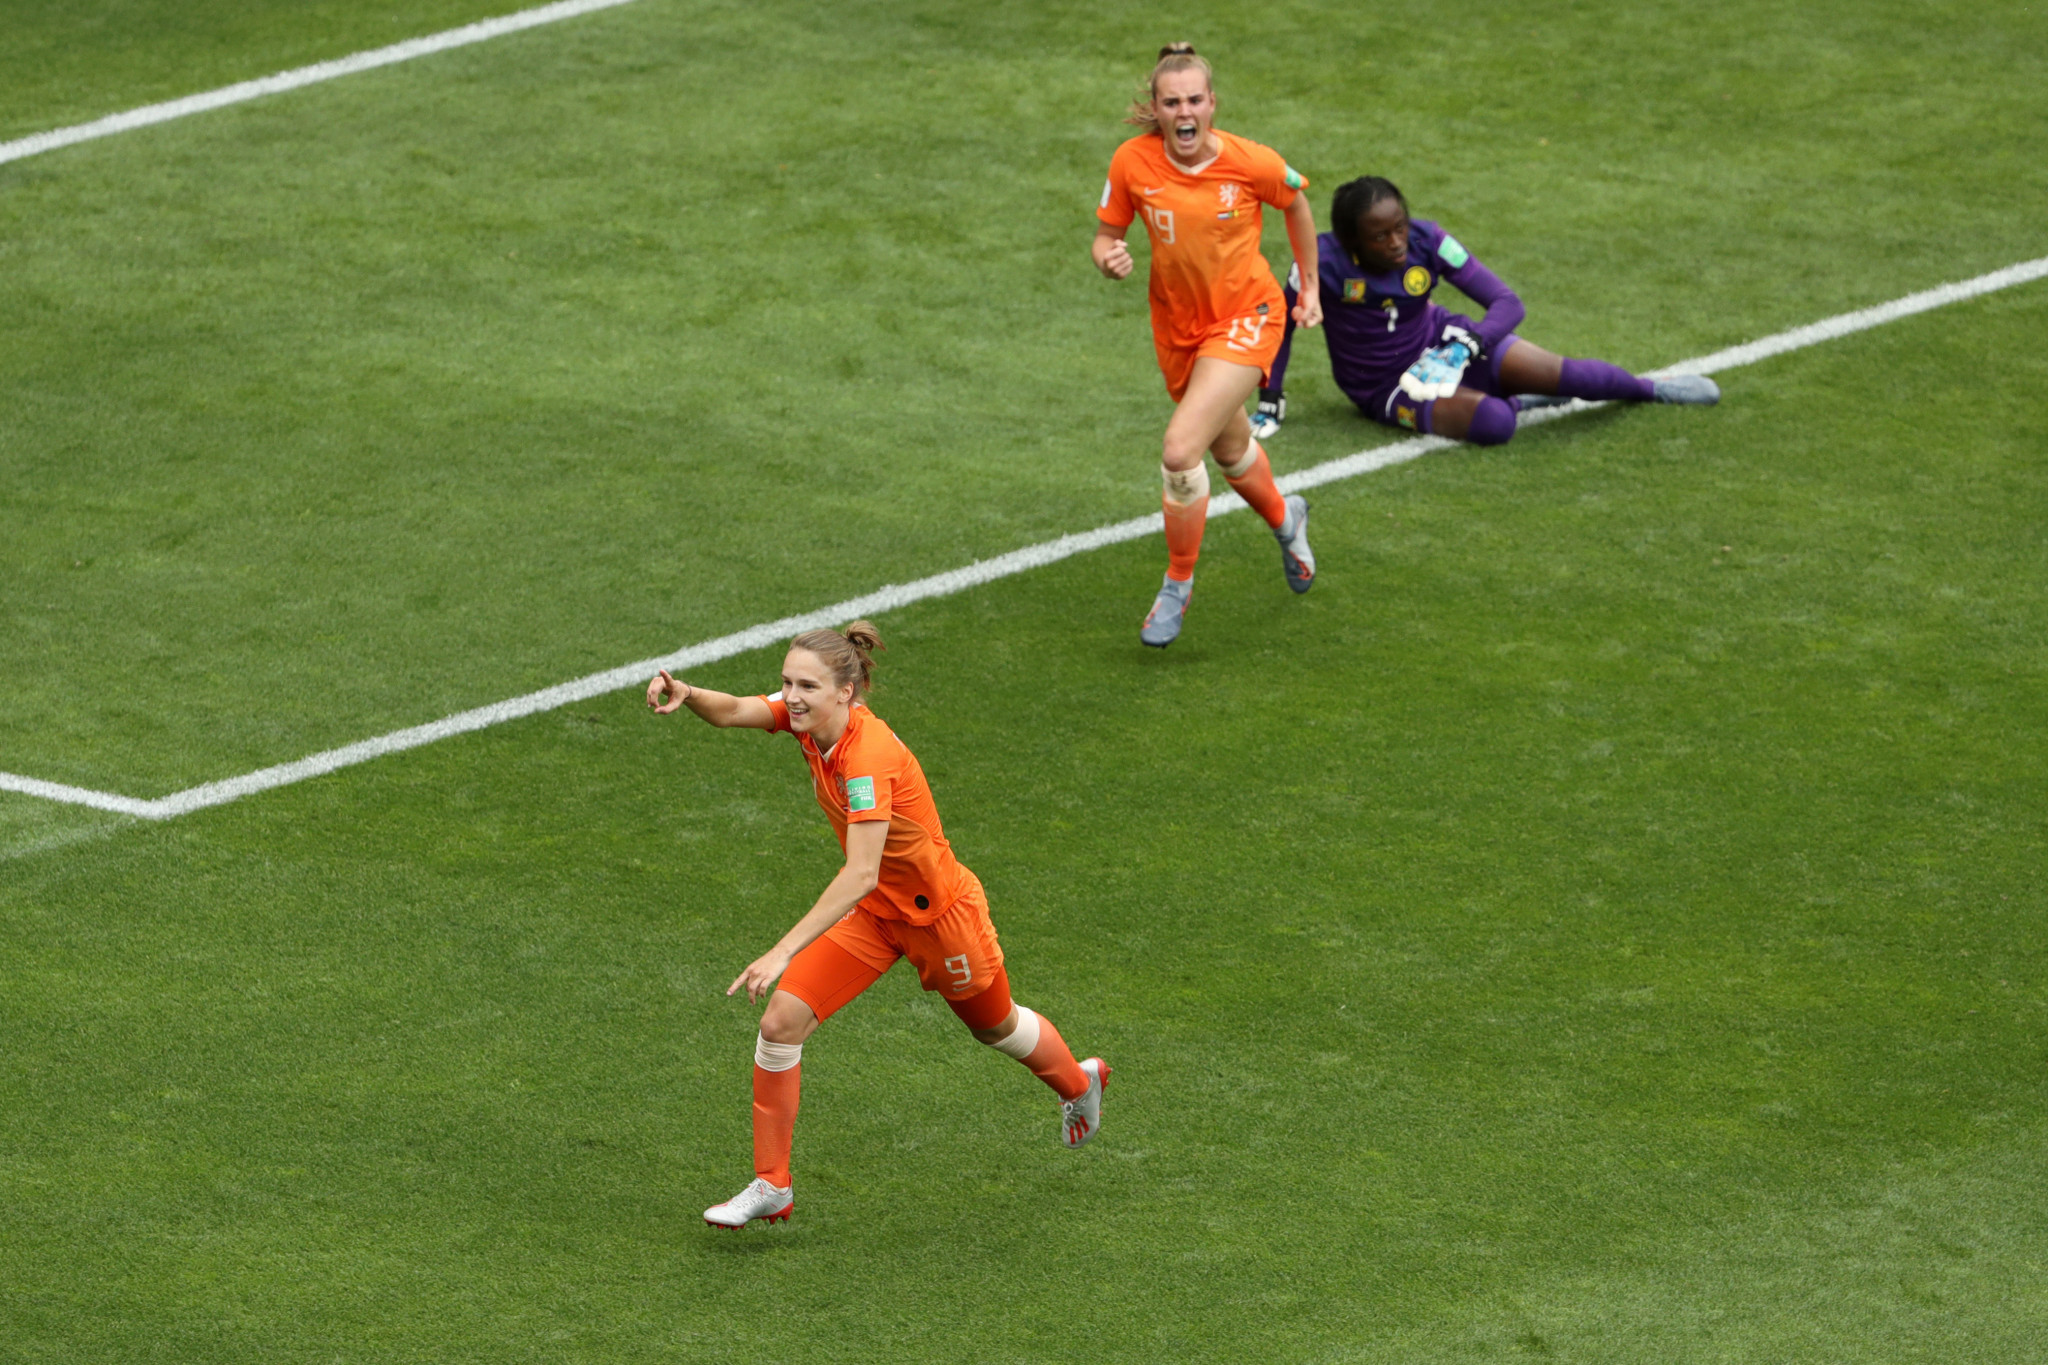 Vivianne Miedema has become the all-time top scorer for the Netherlands with 60 goals ©Getty Images